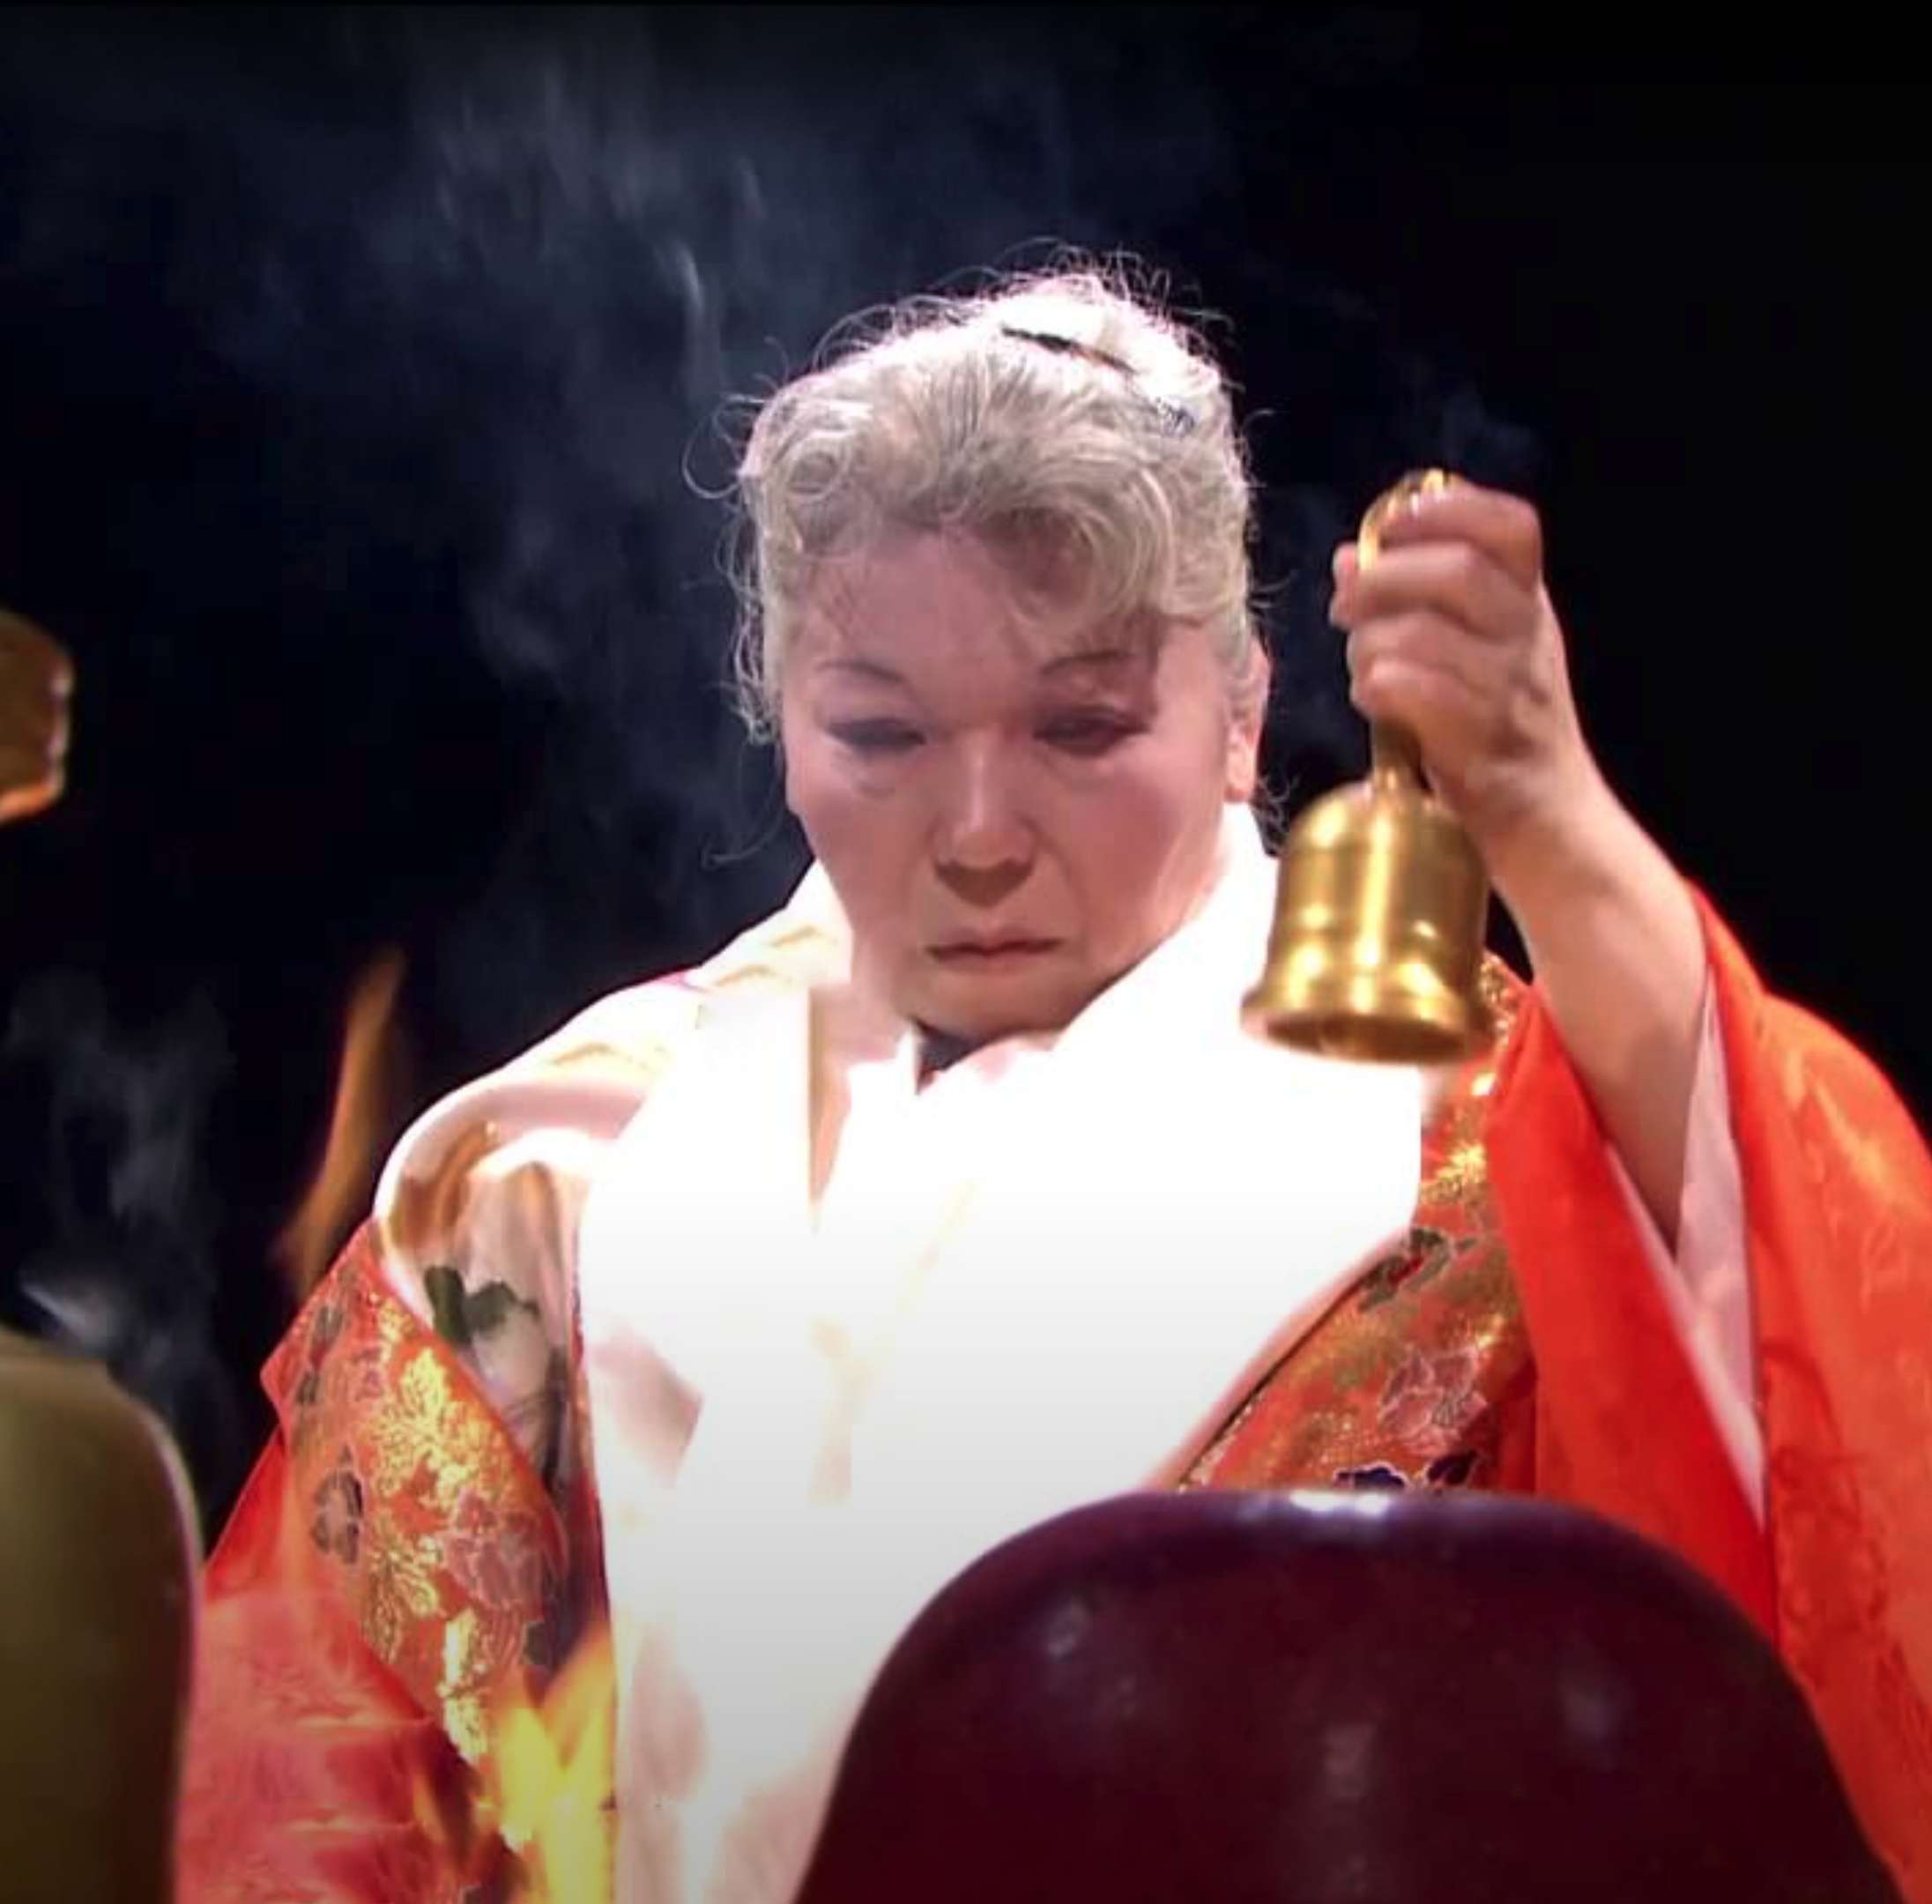 Her Holiness, in bright orange and white robes, rings a ritual hand bell in front of a open fire with an expression of deep concentration.